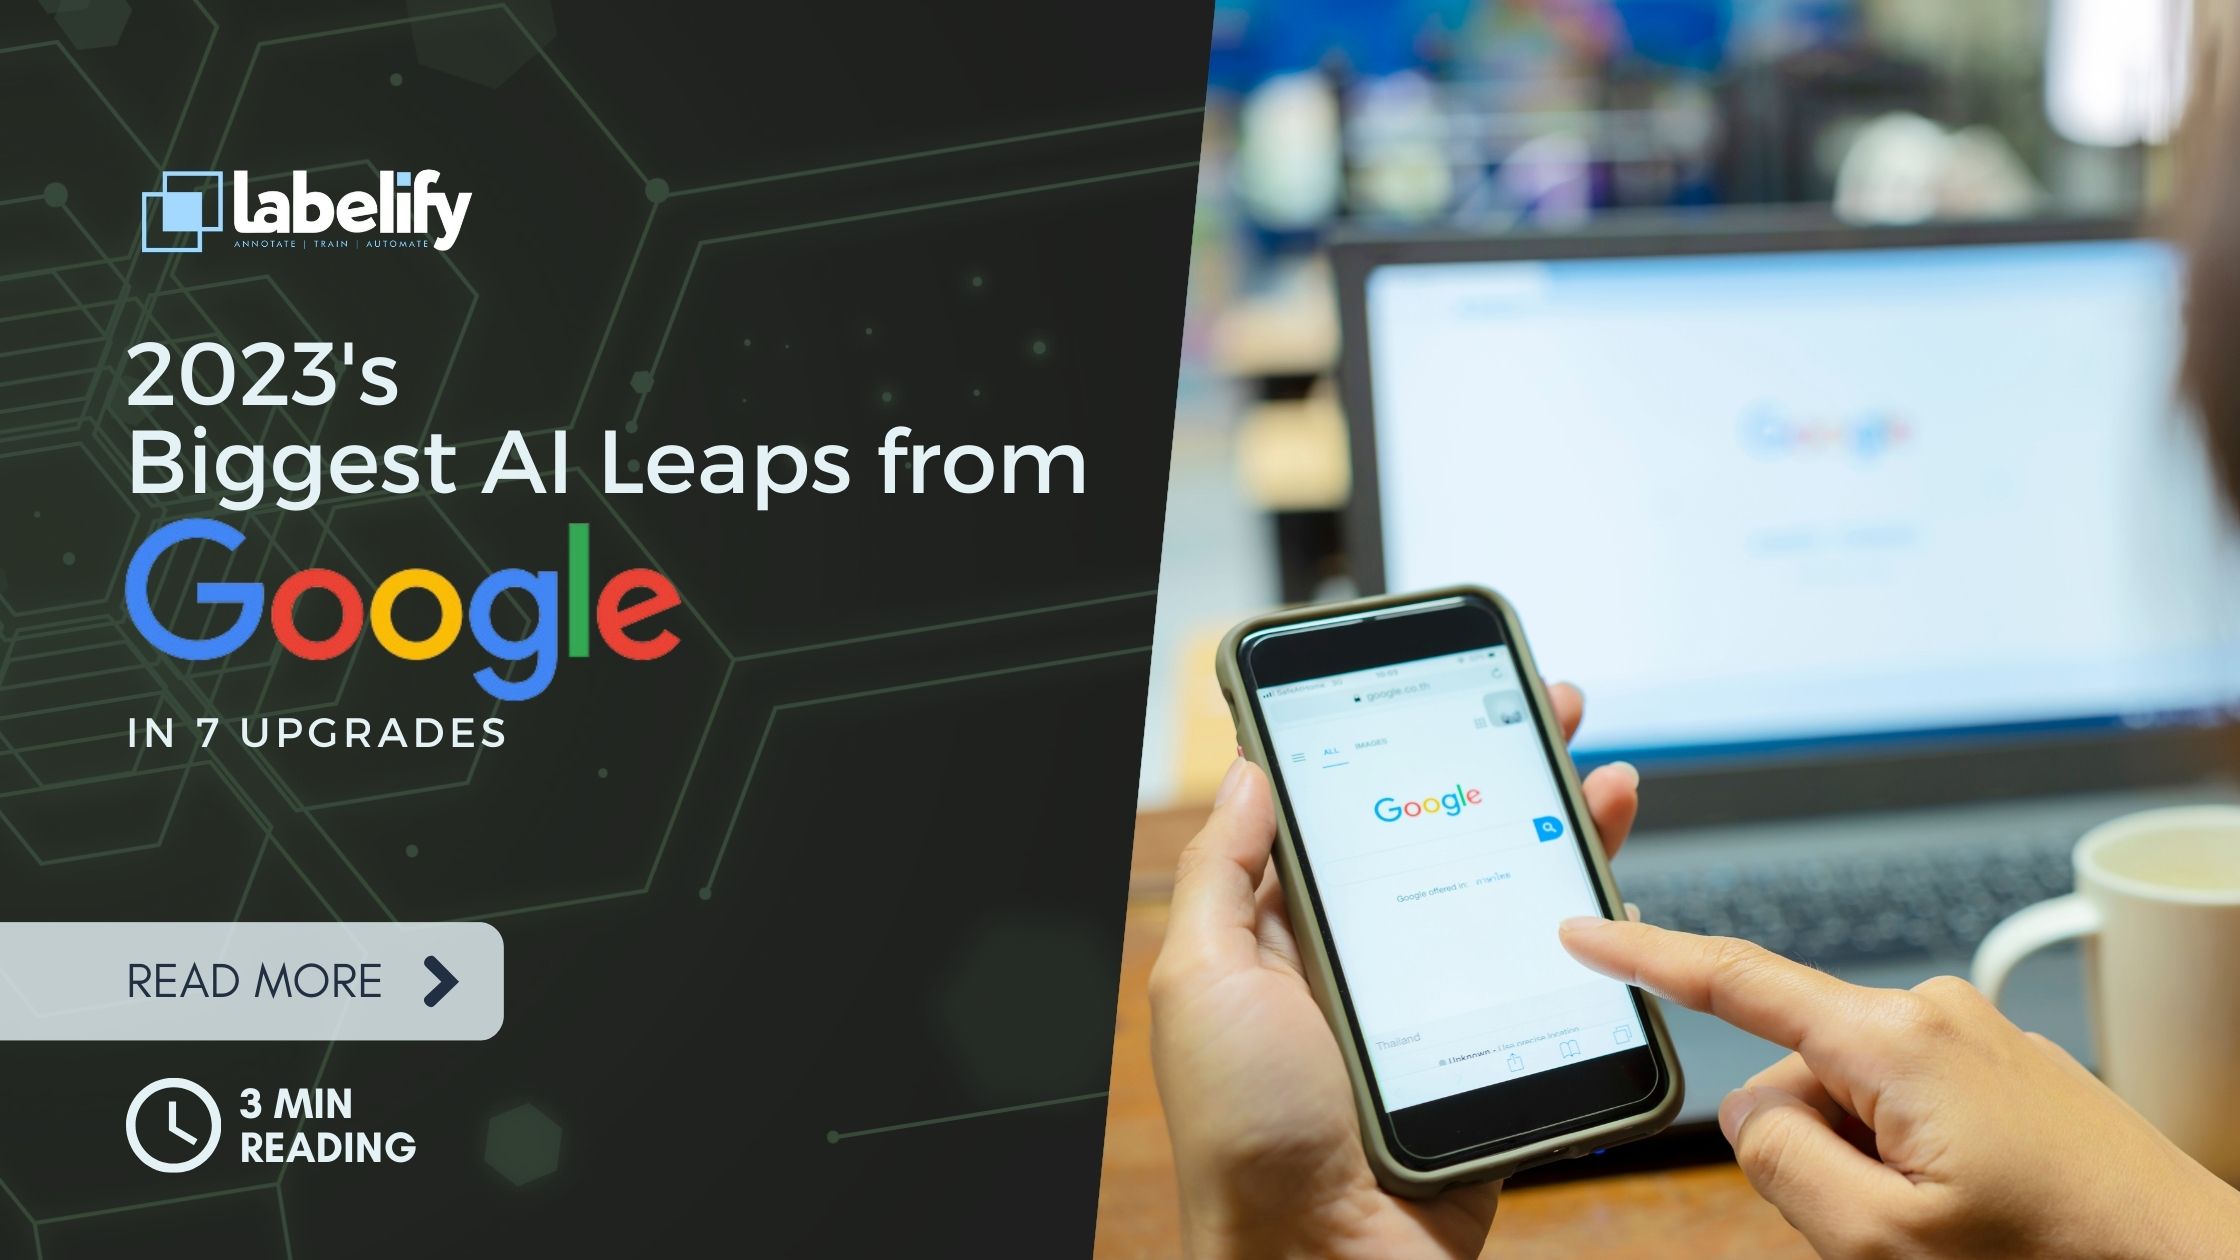 2023’s Biggest AI Leaps from Google in 7 Upgrades